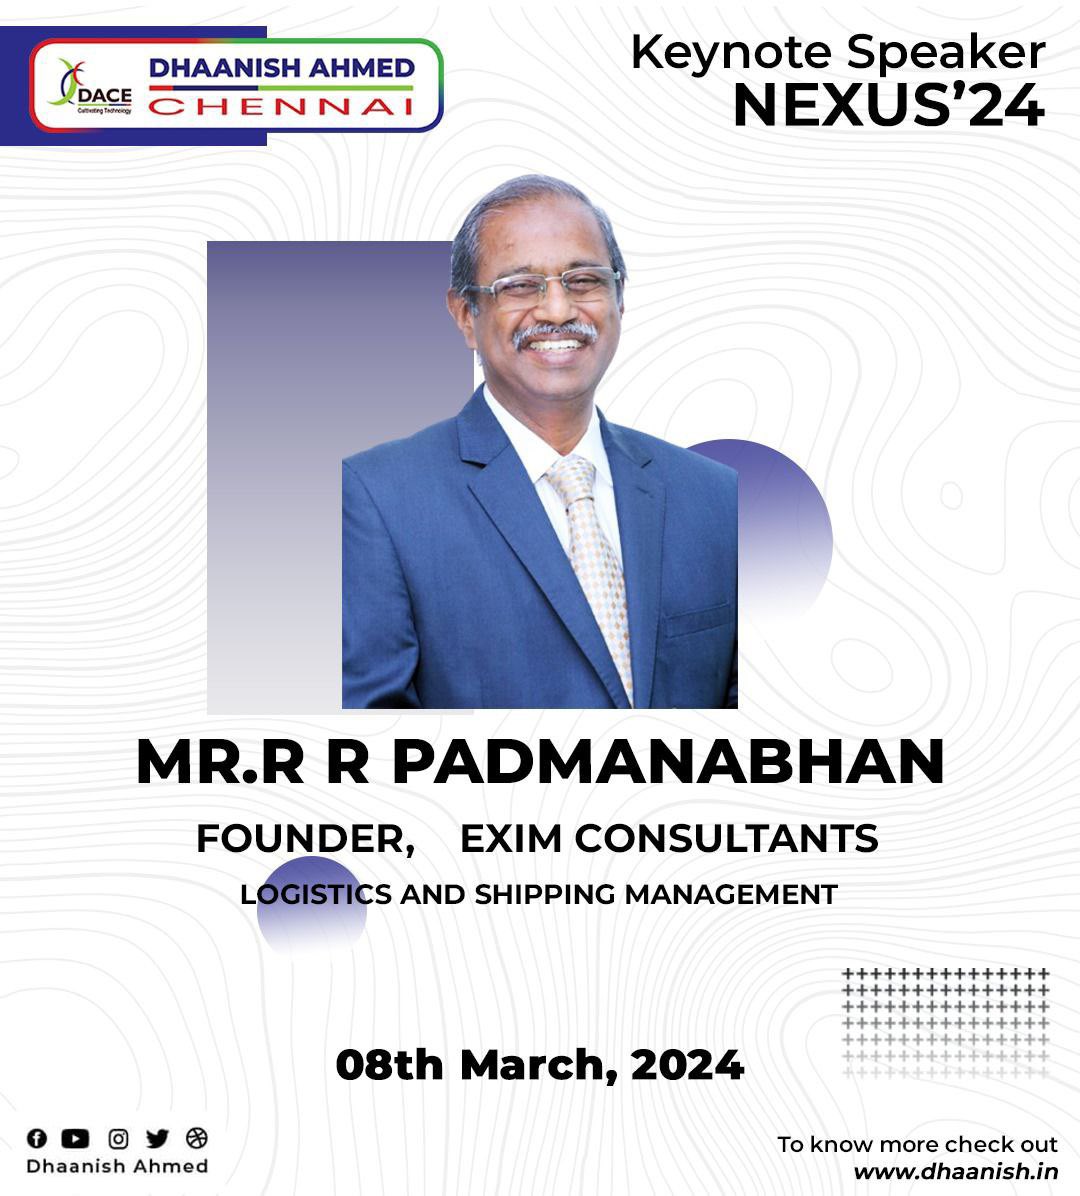 Dhaanish Ahmed Chennai is excited 🌟to welcome 🙏 Mr RR Padmanabhan, Founder, EXIM Consultant as a keynote speaker 🔈 for NEXUS’24 💥on 8th March 2024. #dhaanishahmedchennai #keynotespeaker #eximconsultant #nexus24